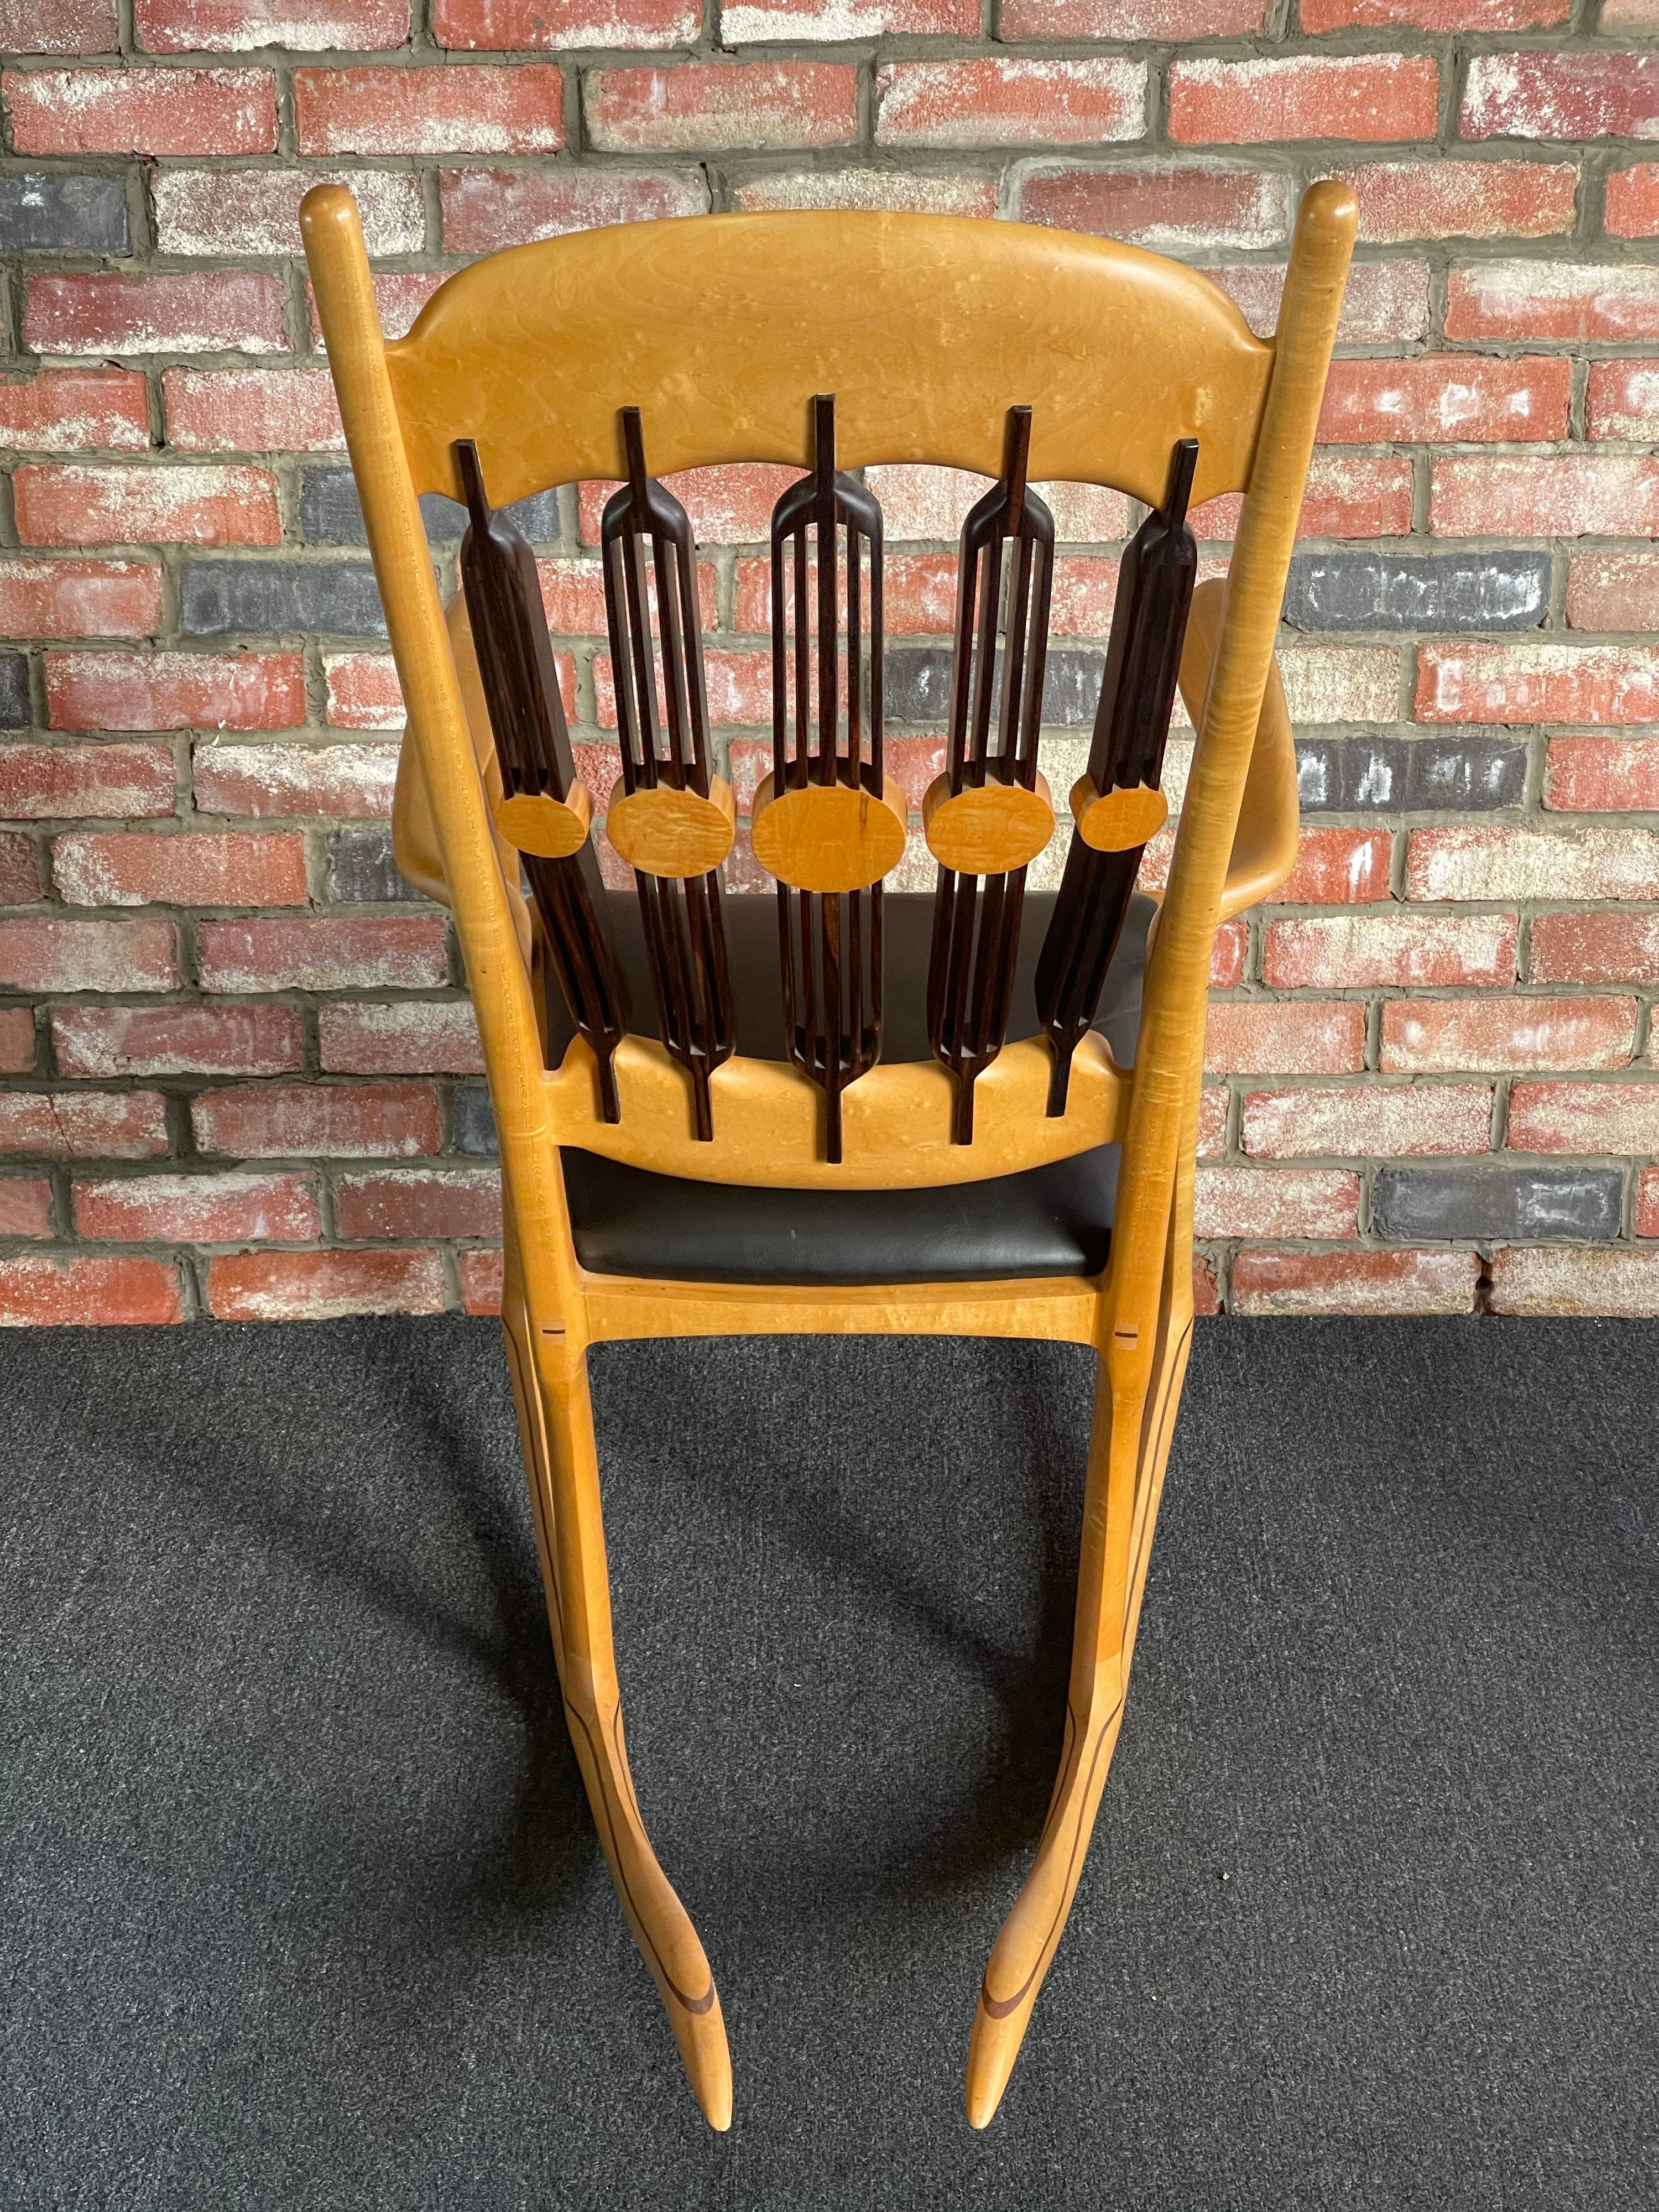  Handcrafted Artisan Studio Rocking Chair by Jeffry Mann 1987 In Good Condition For Sale In San Diego, CA